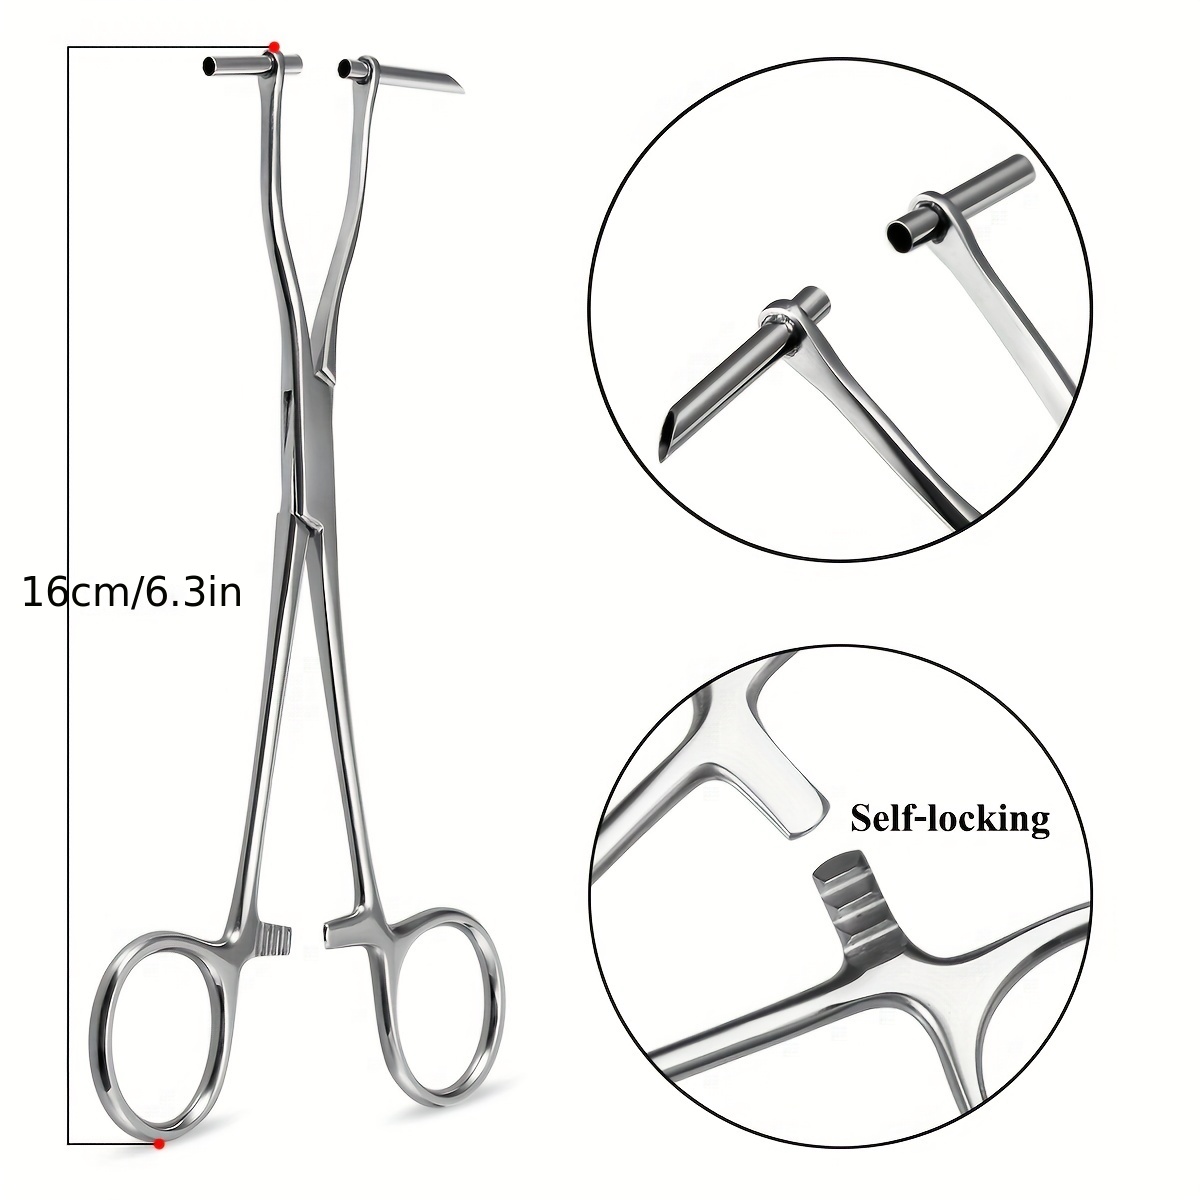 Plastic Body Piercing Tools Pliers Ear Lip Navel Nose Tongue Septum Forcep  Clamp Plier Tool For Tattoo Body Jewelry From Hayoumart2, $3.98